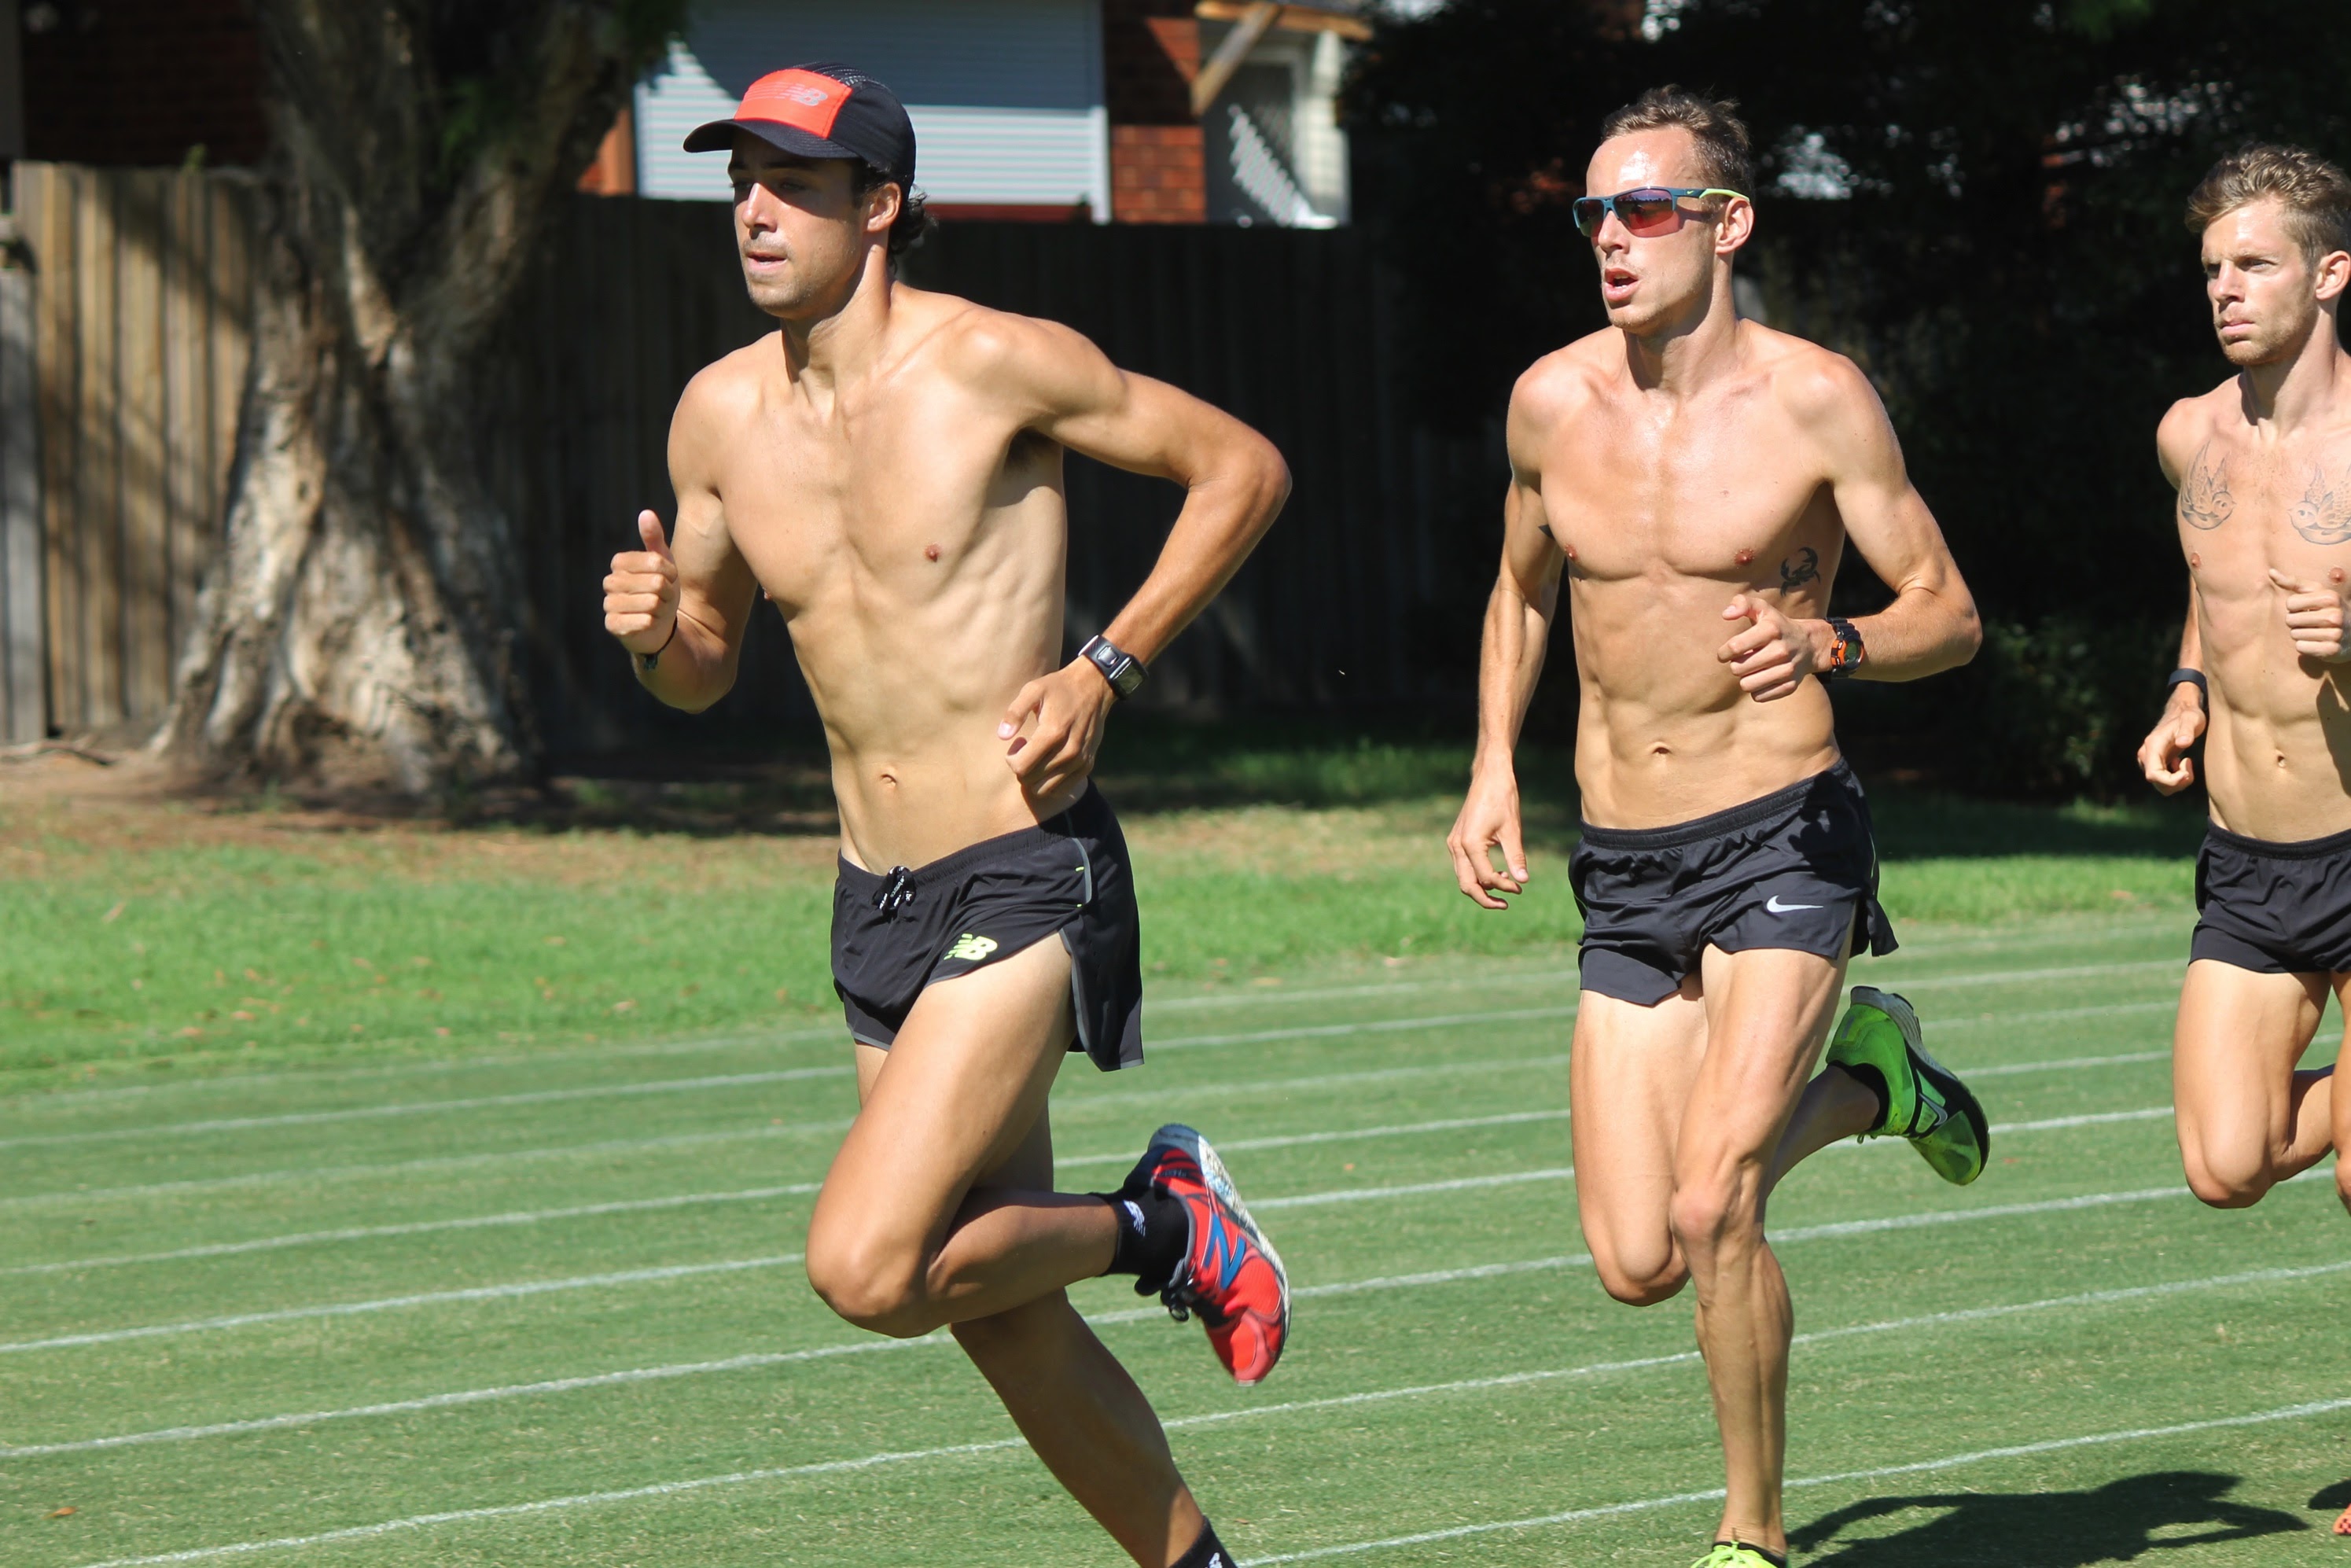 Luke Mathews, Ryan Gregson and Brett Robinson at MTC training session in Melbourne earlier this year: Photo by RT